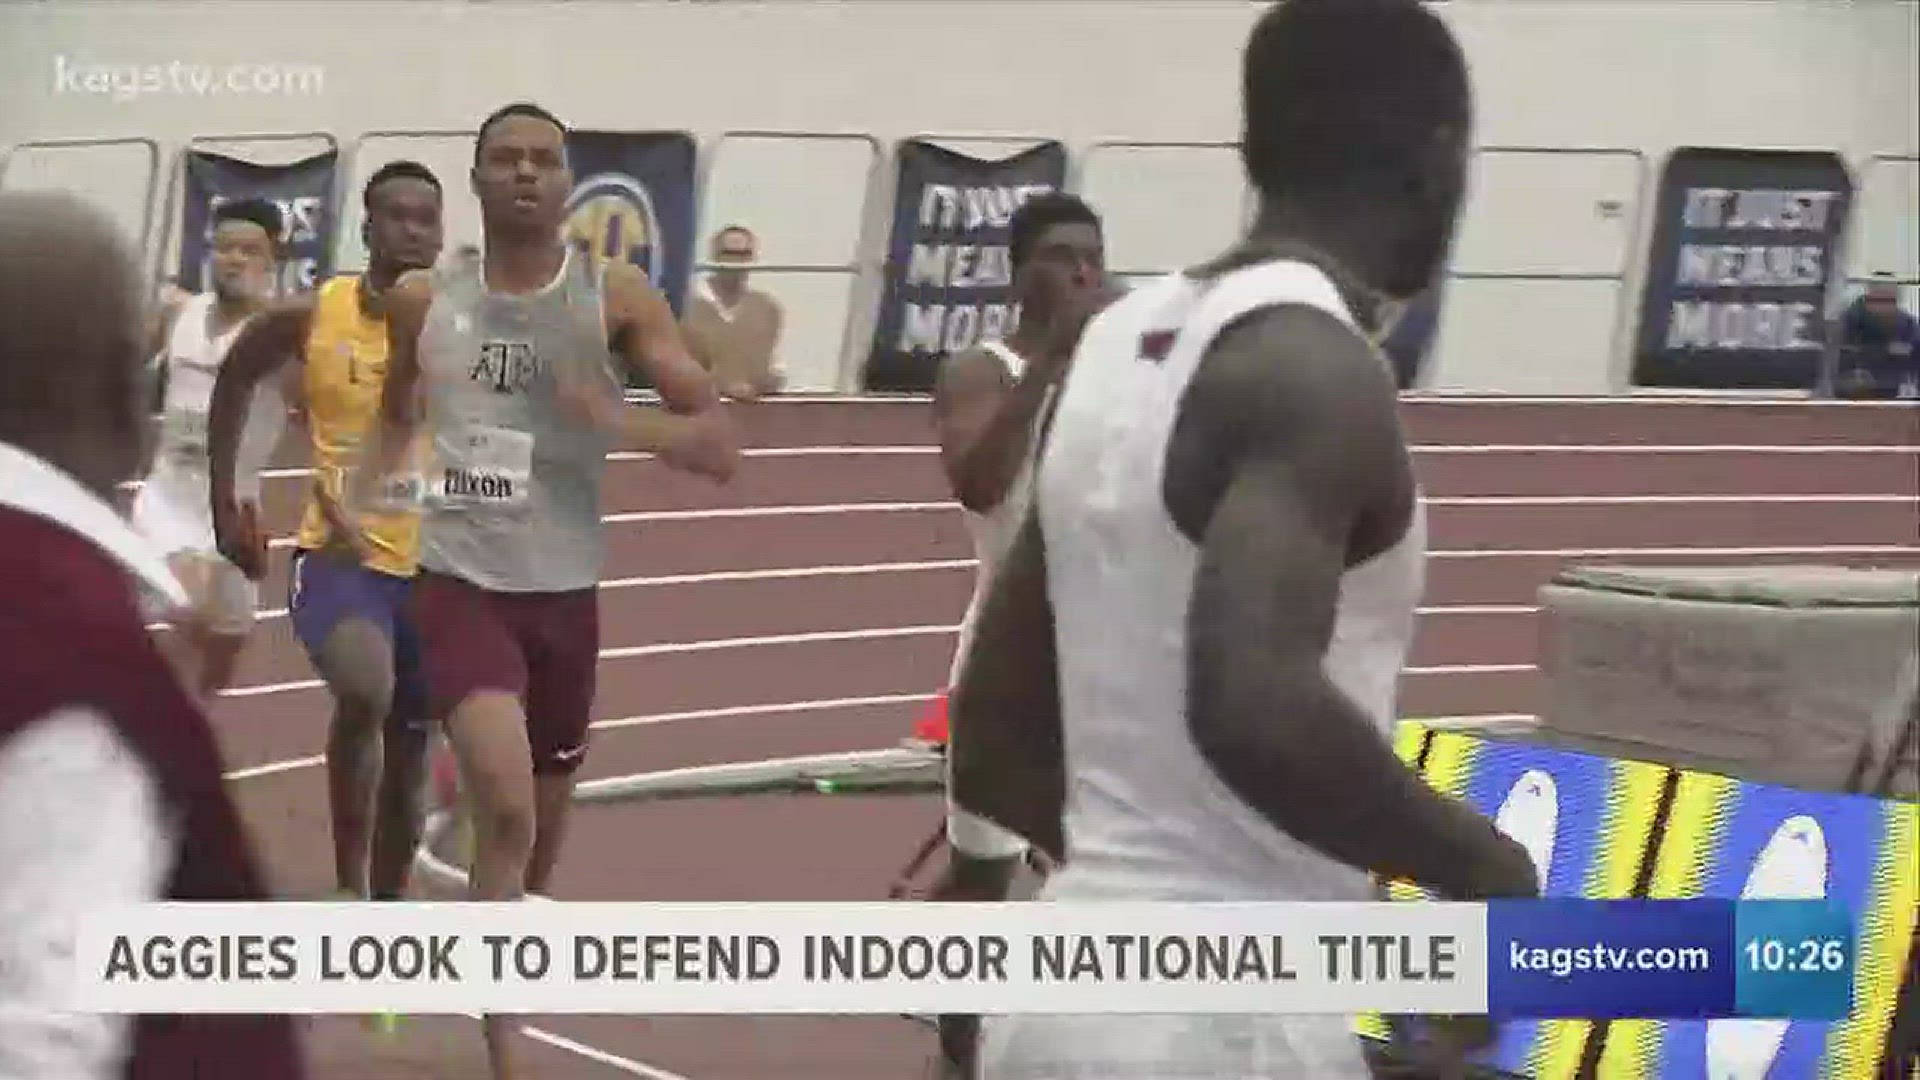 Texas A&M track and field will look to defend its indoor national championship this weekend in Aggieland.